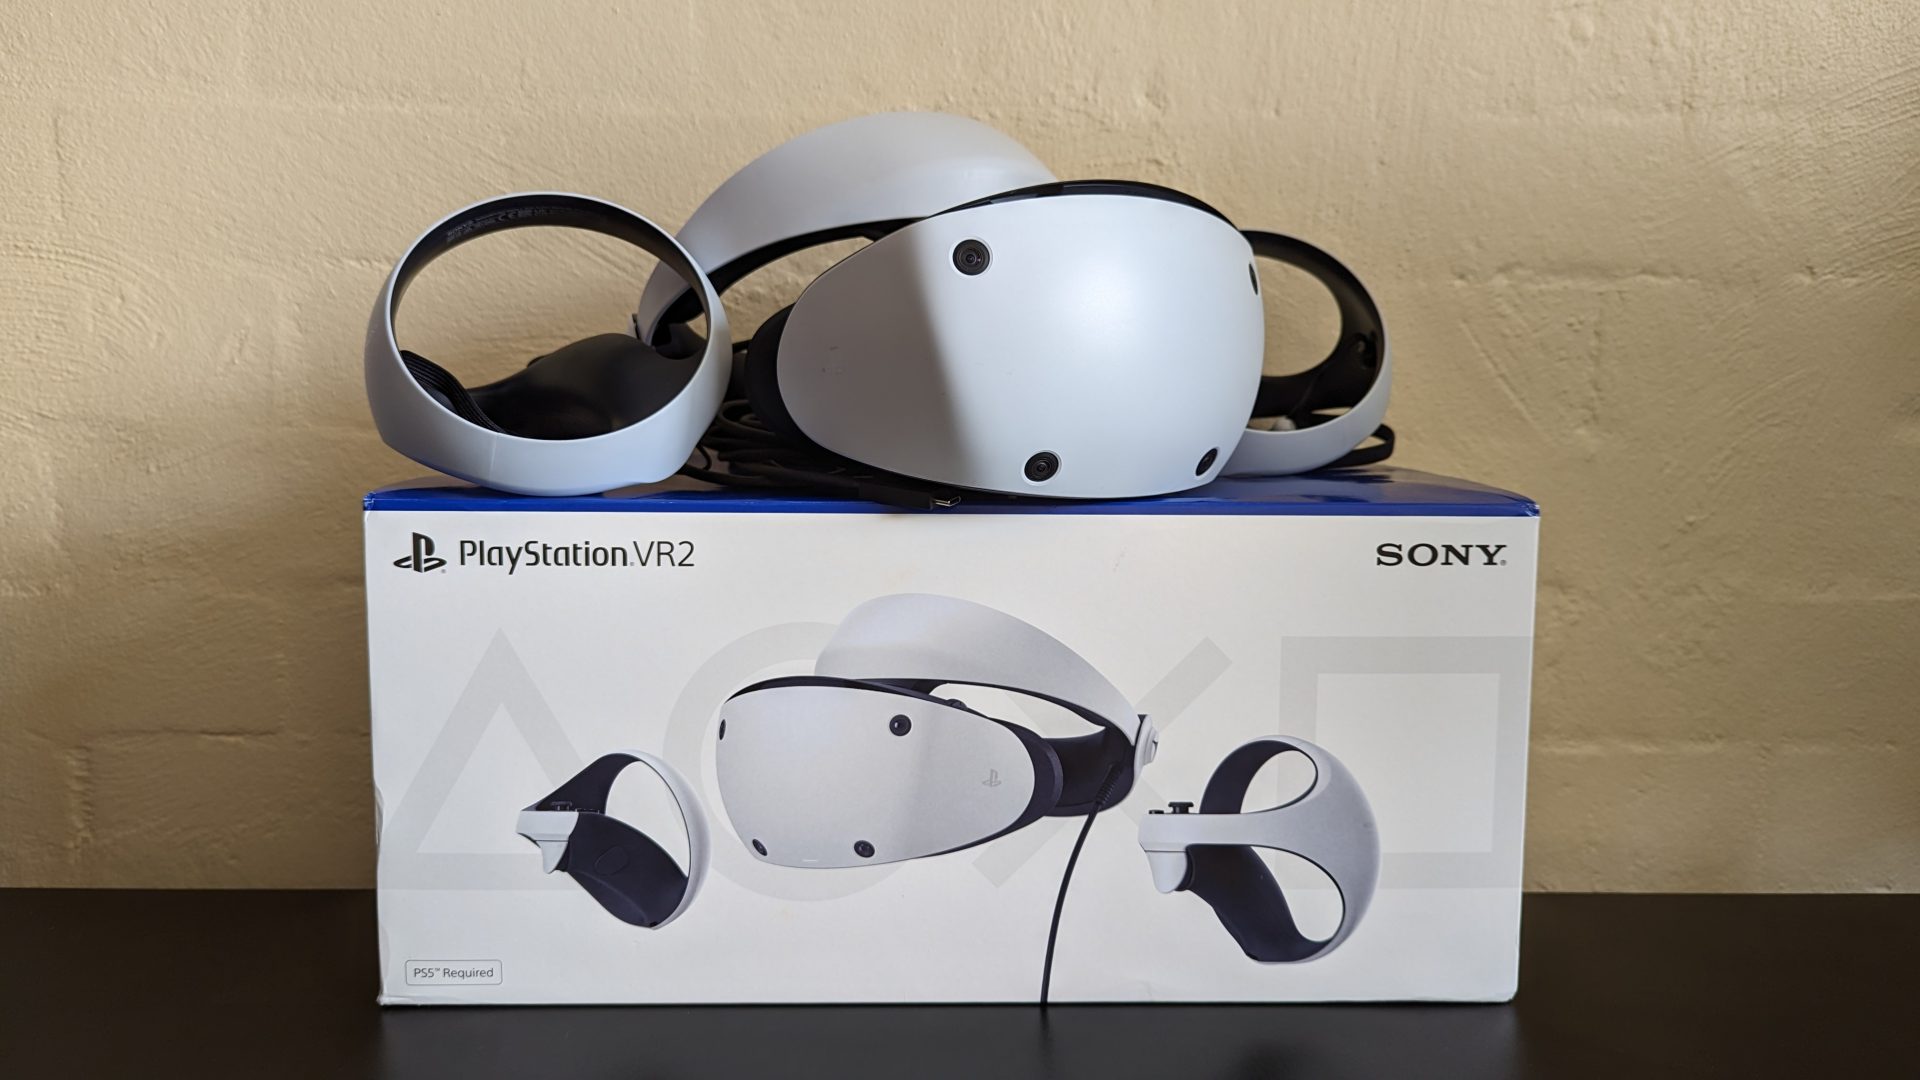 PlayStation VR2 can work on PCwith a big catch